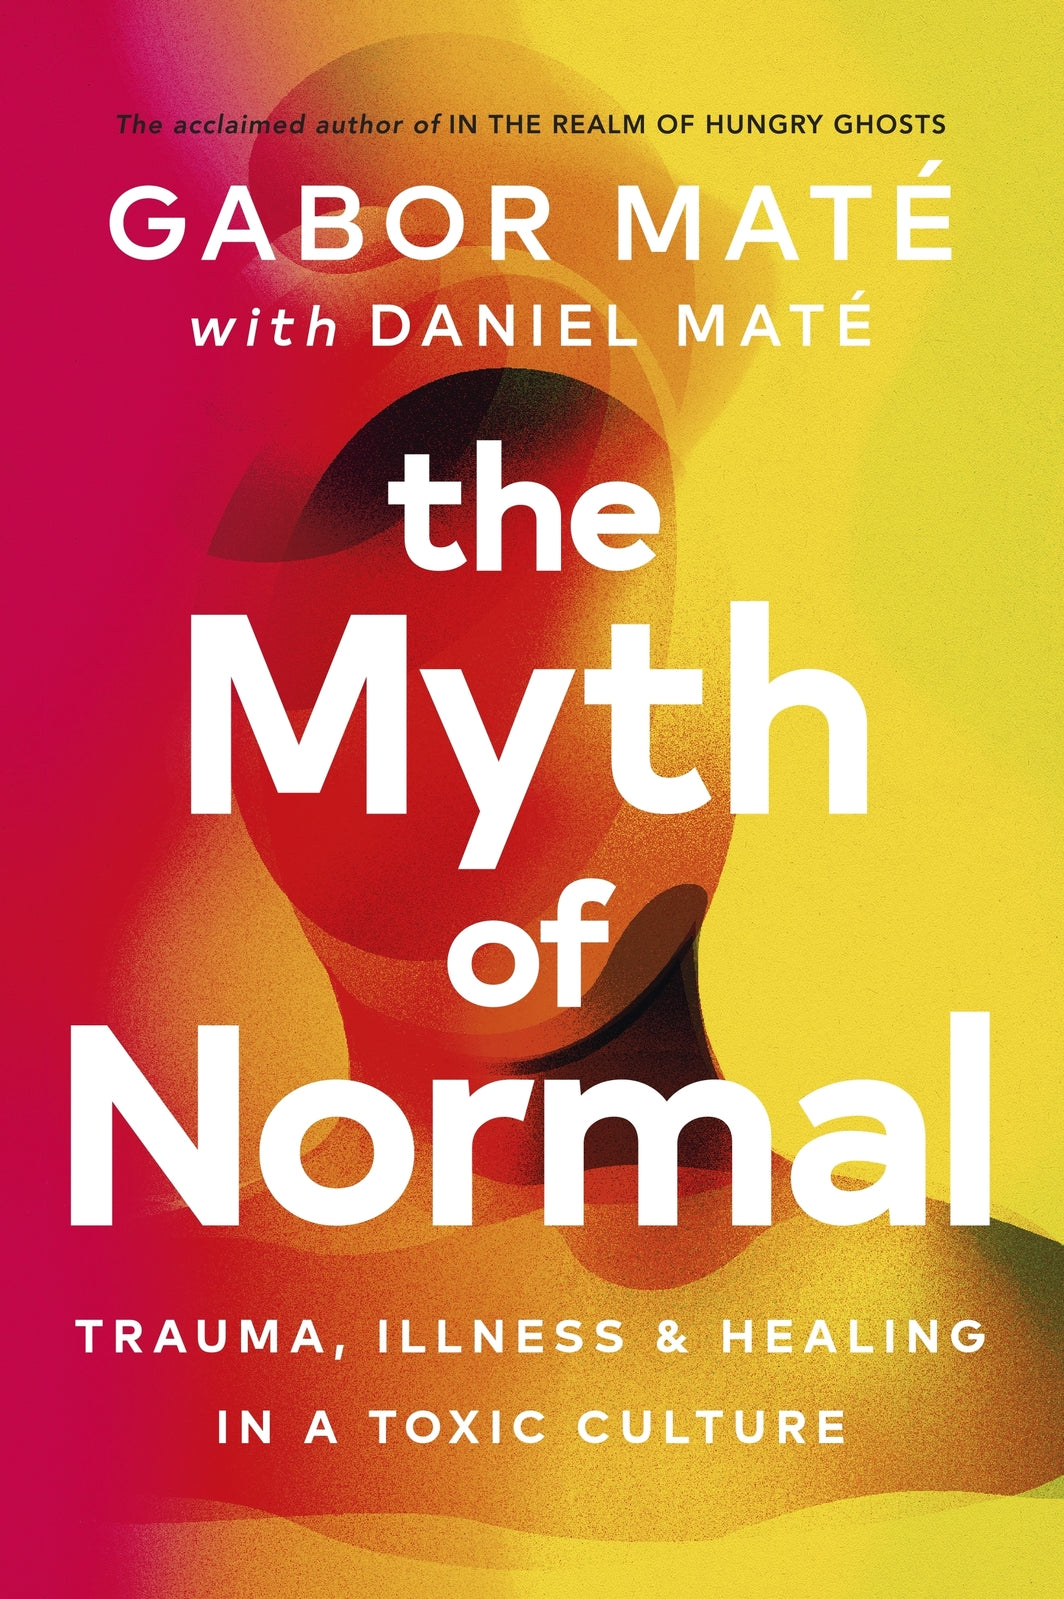 Myth of Normal - Trauma, Illness & Healing in a Toxic Culture